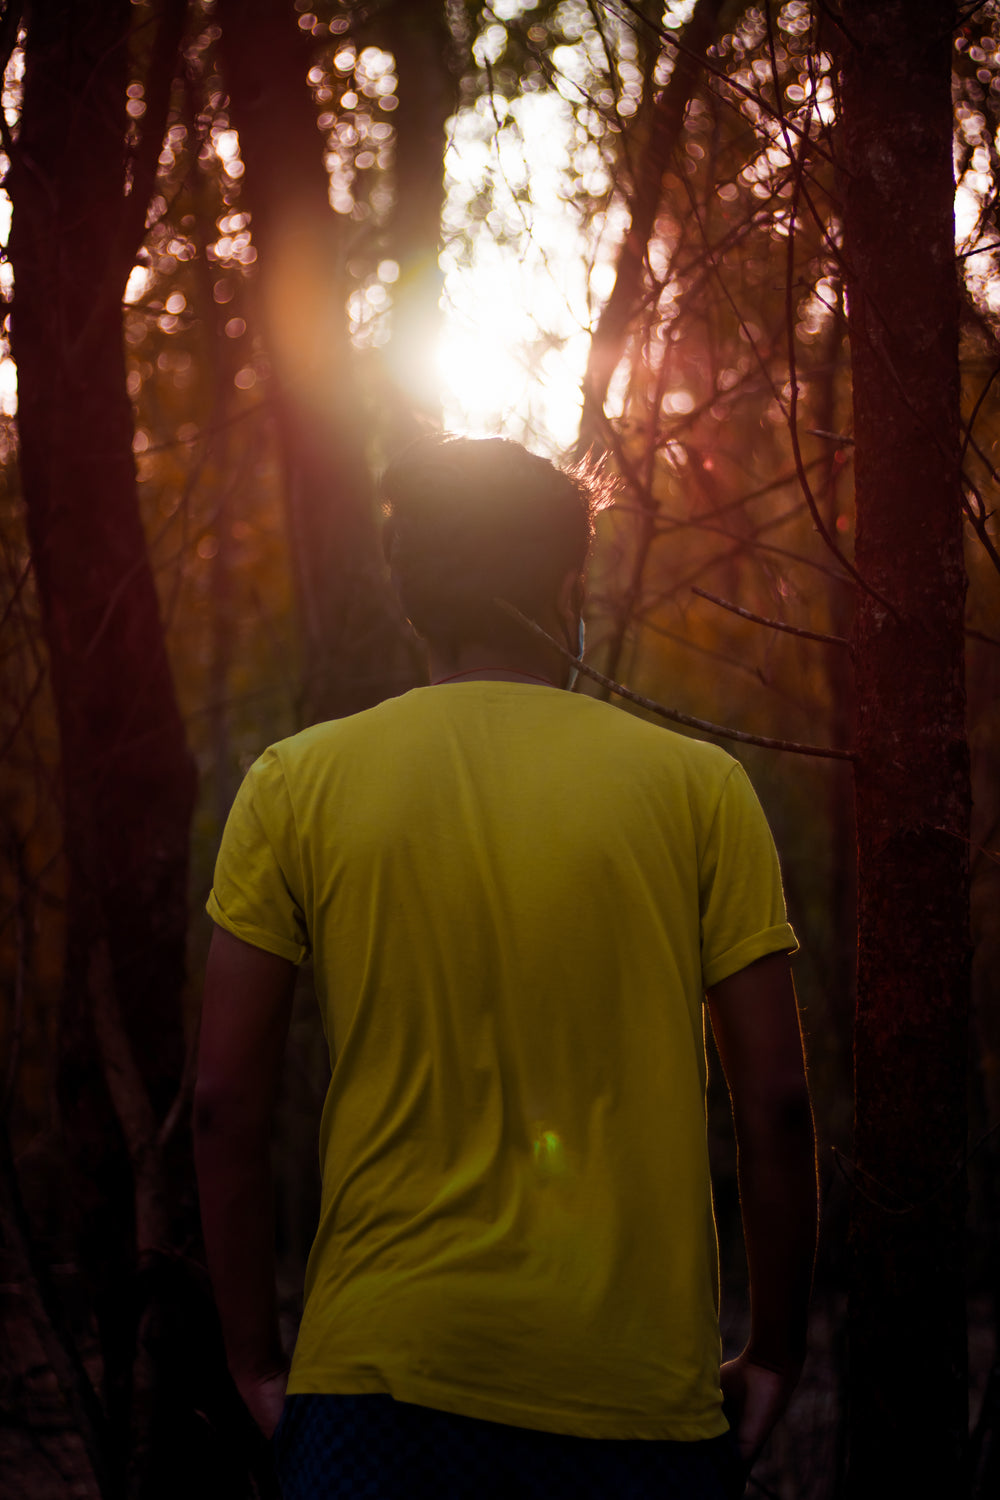 person in a yellow shirt walks into a dark forest